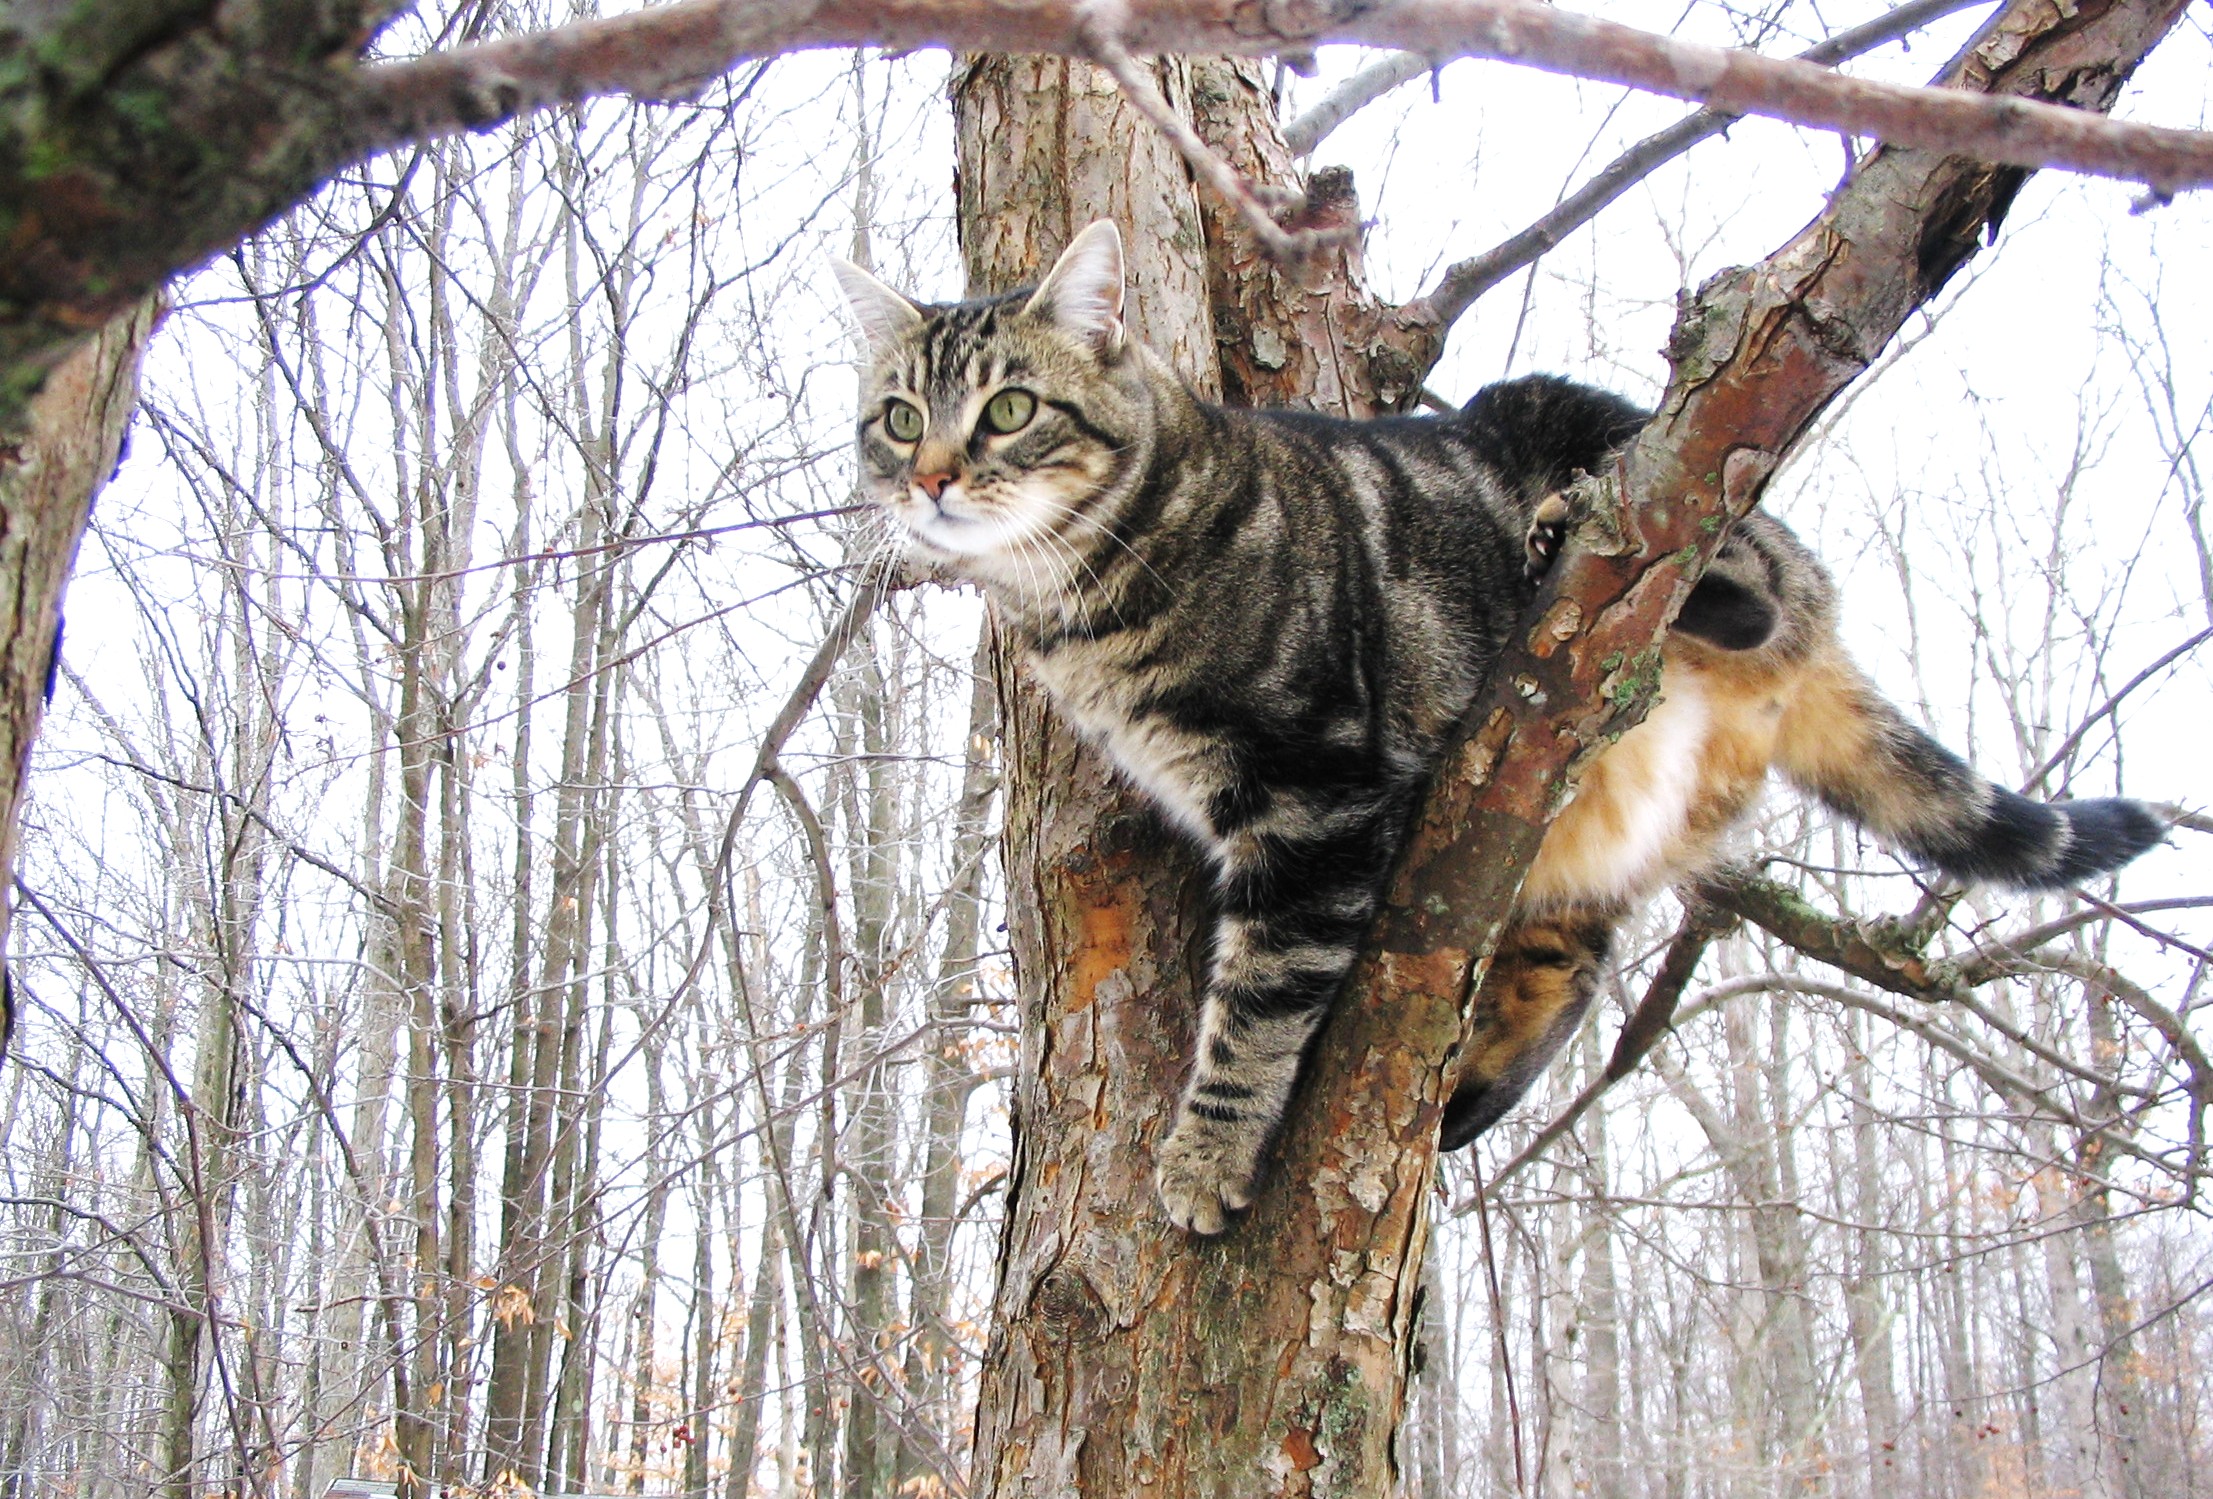 Cat Up A Tree (user submitted)